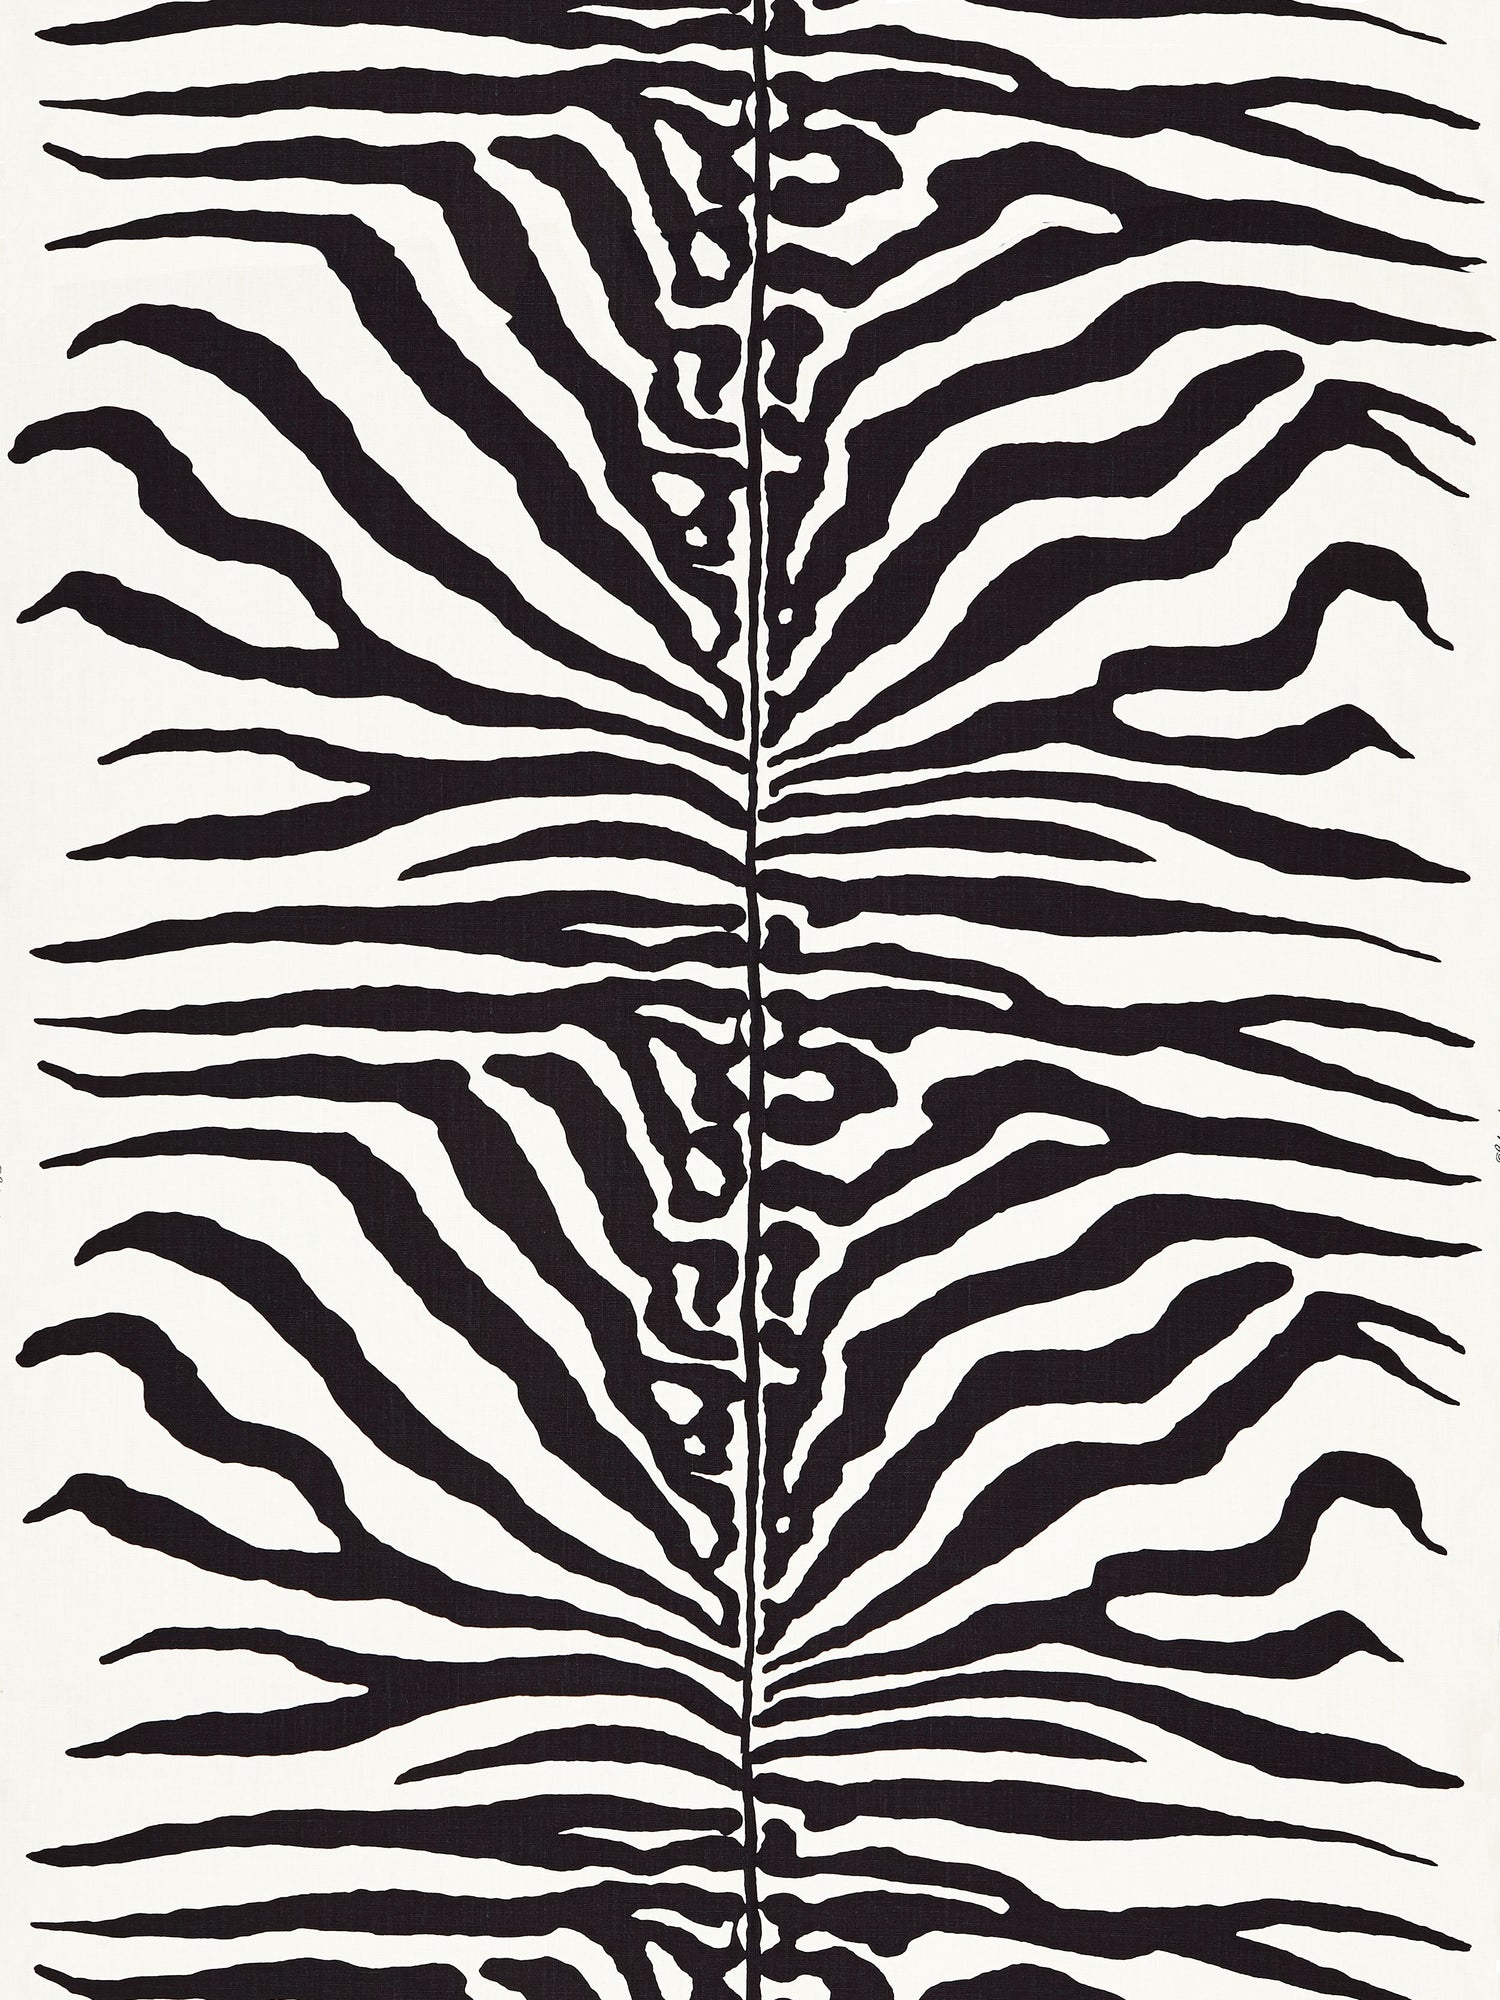 Zebra fabric in black color - pattern number SC 000116366M - by Scalamandre in the Scalamandre Fabrics Book 1 collection